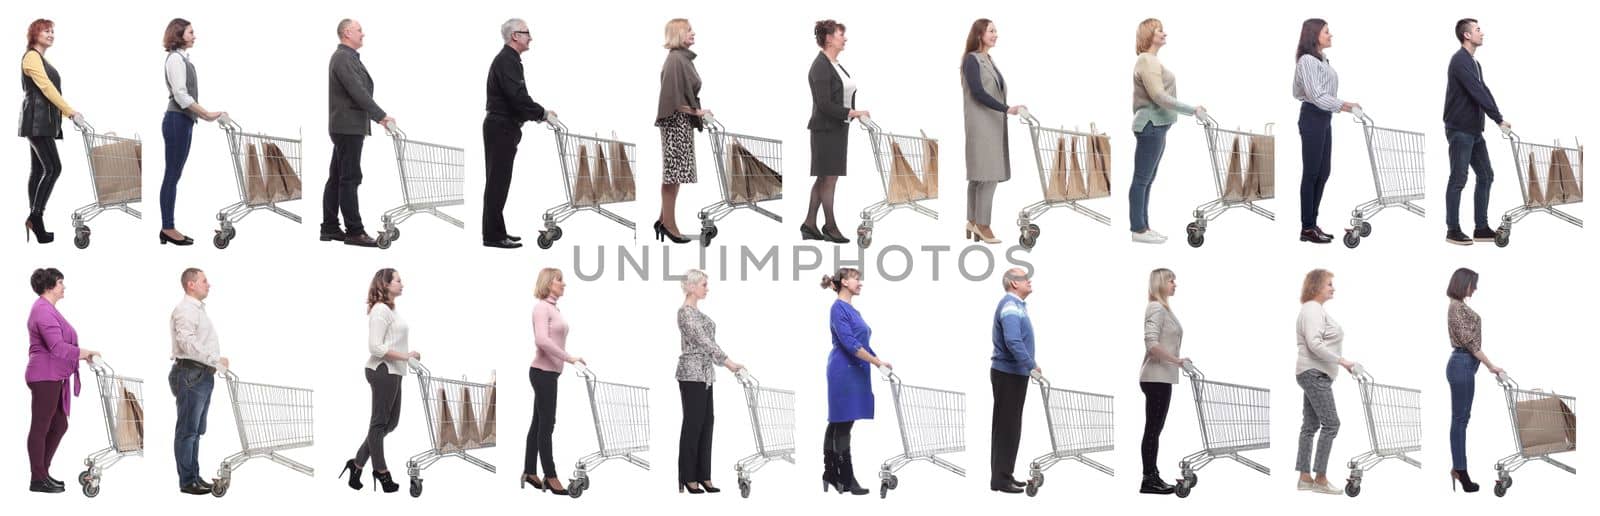 group of people with cart looking ahead isolated on white by asdf